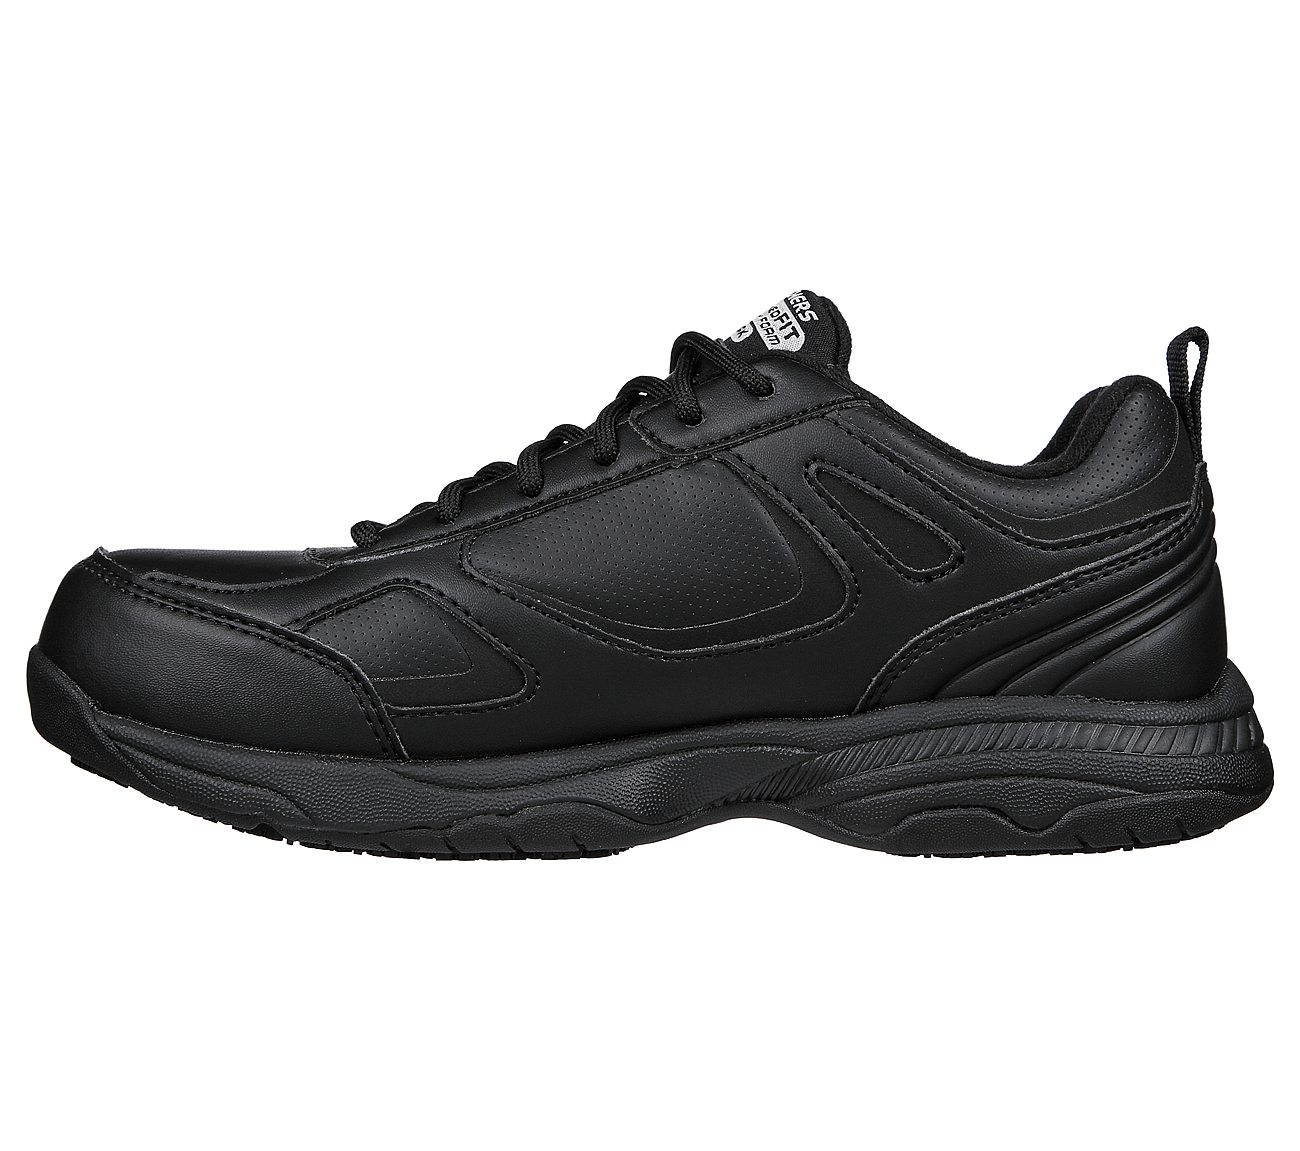 skechers relaxed fit equip sandals